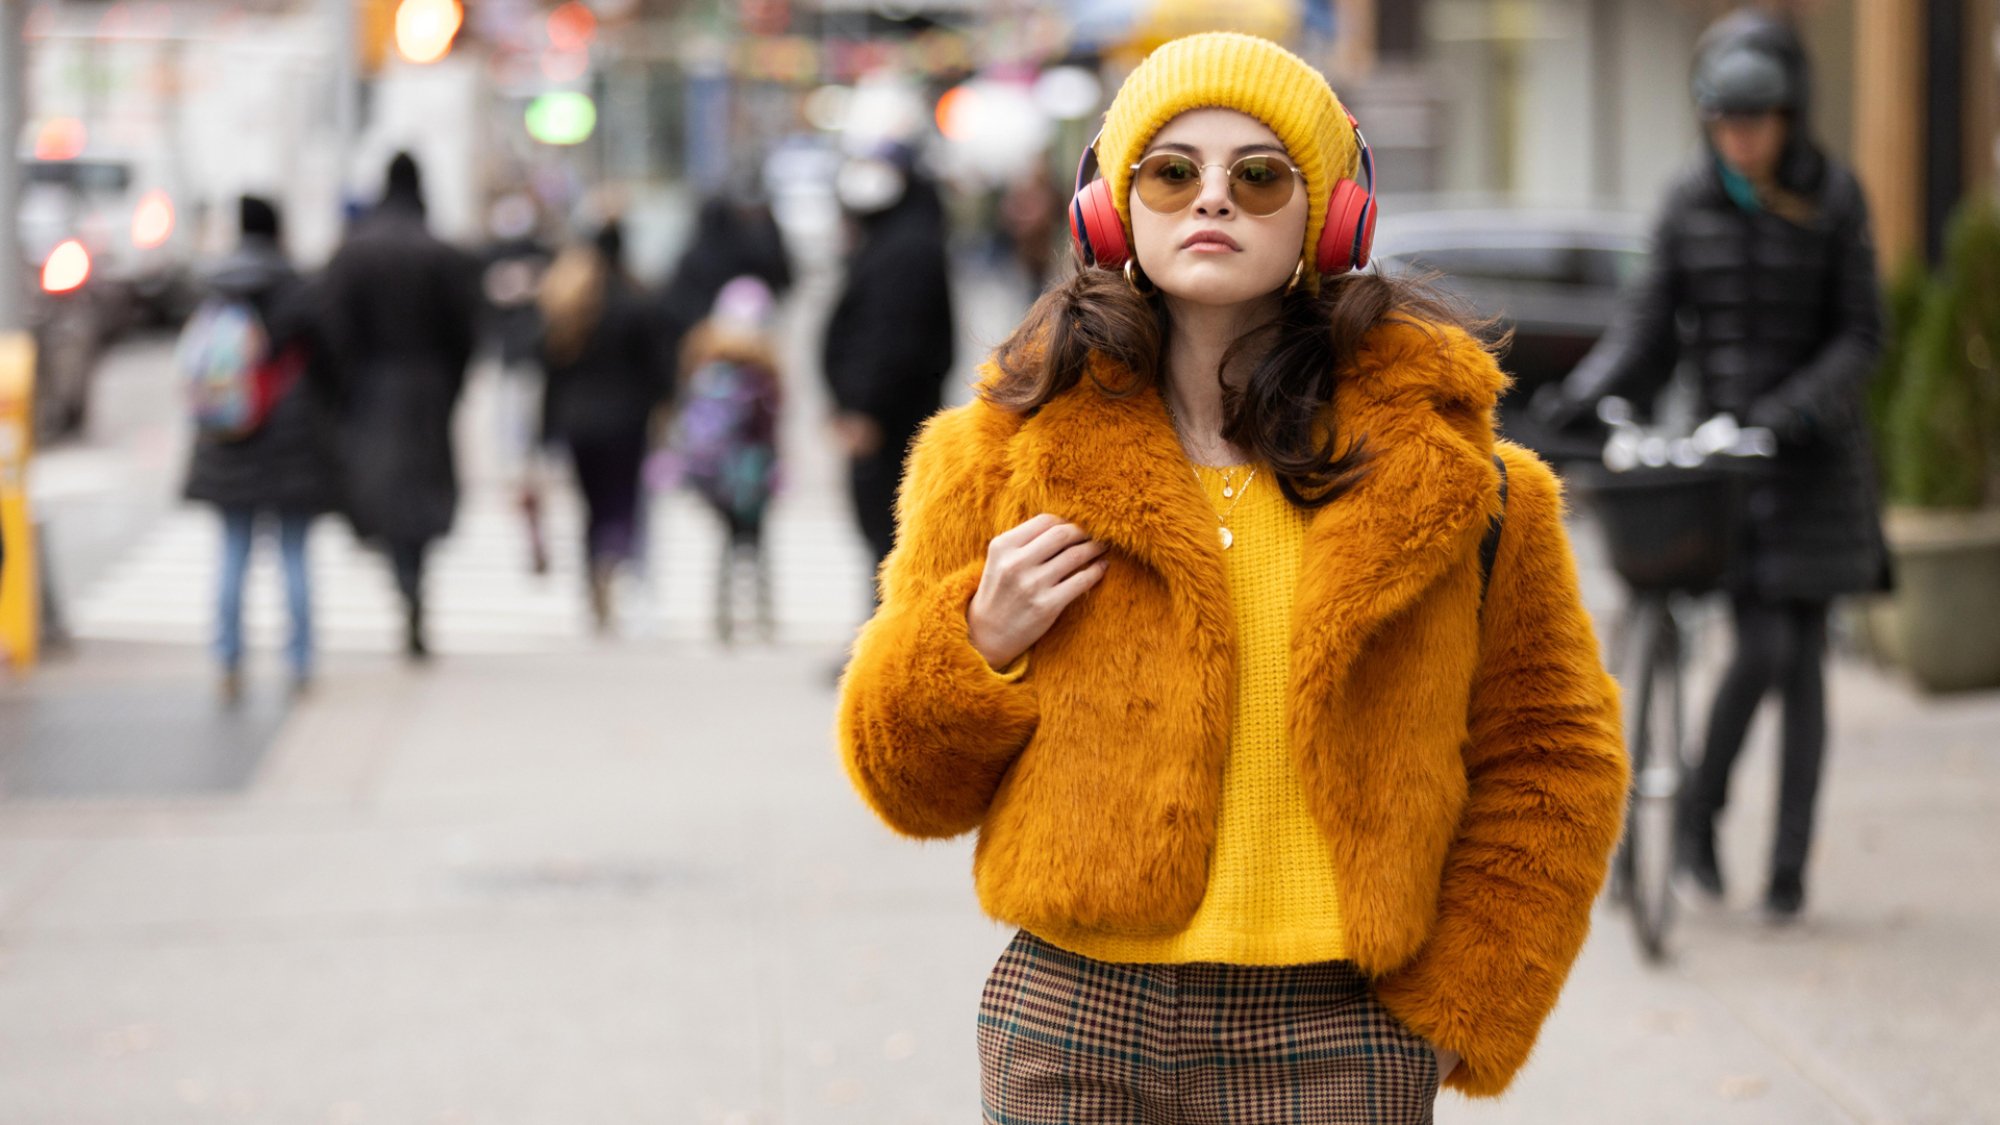 A young woman in a mustard sweater and fluffy jacket with matching headphones and beanie in New York.